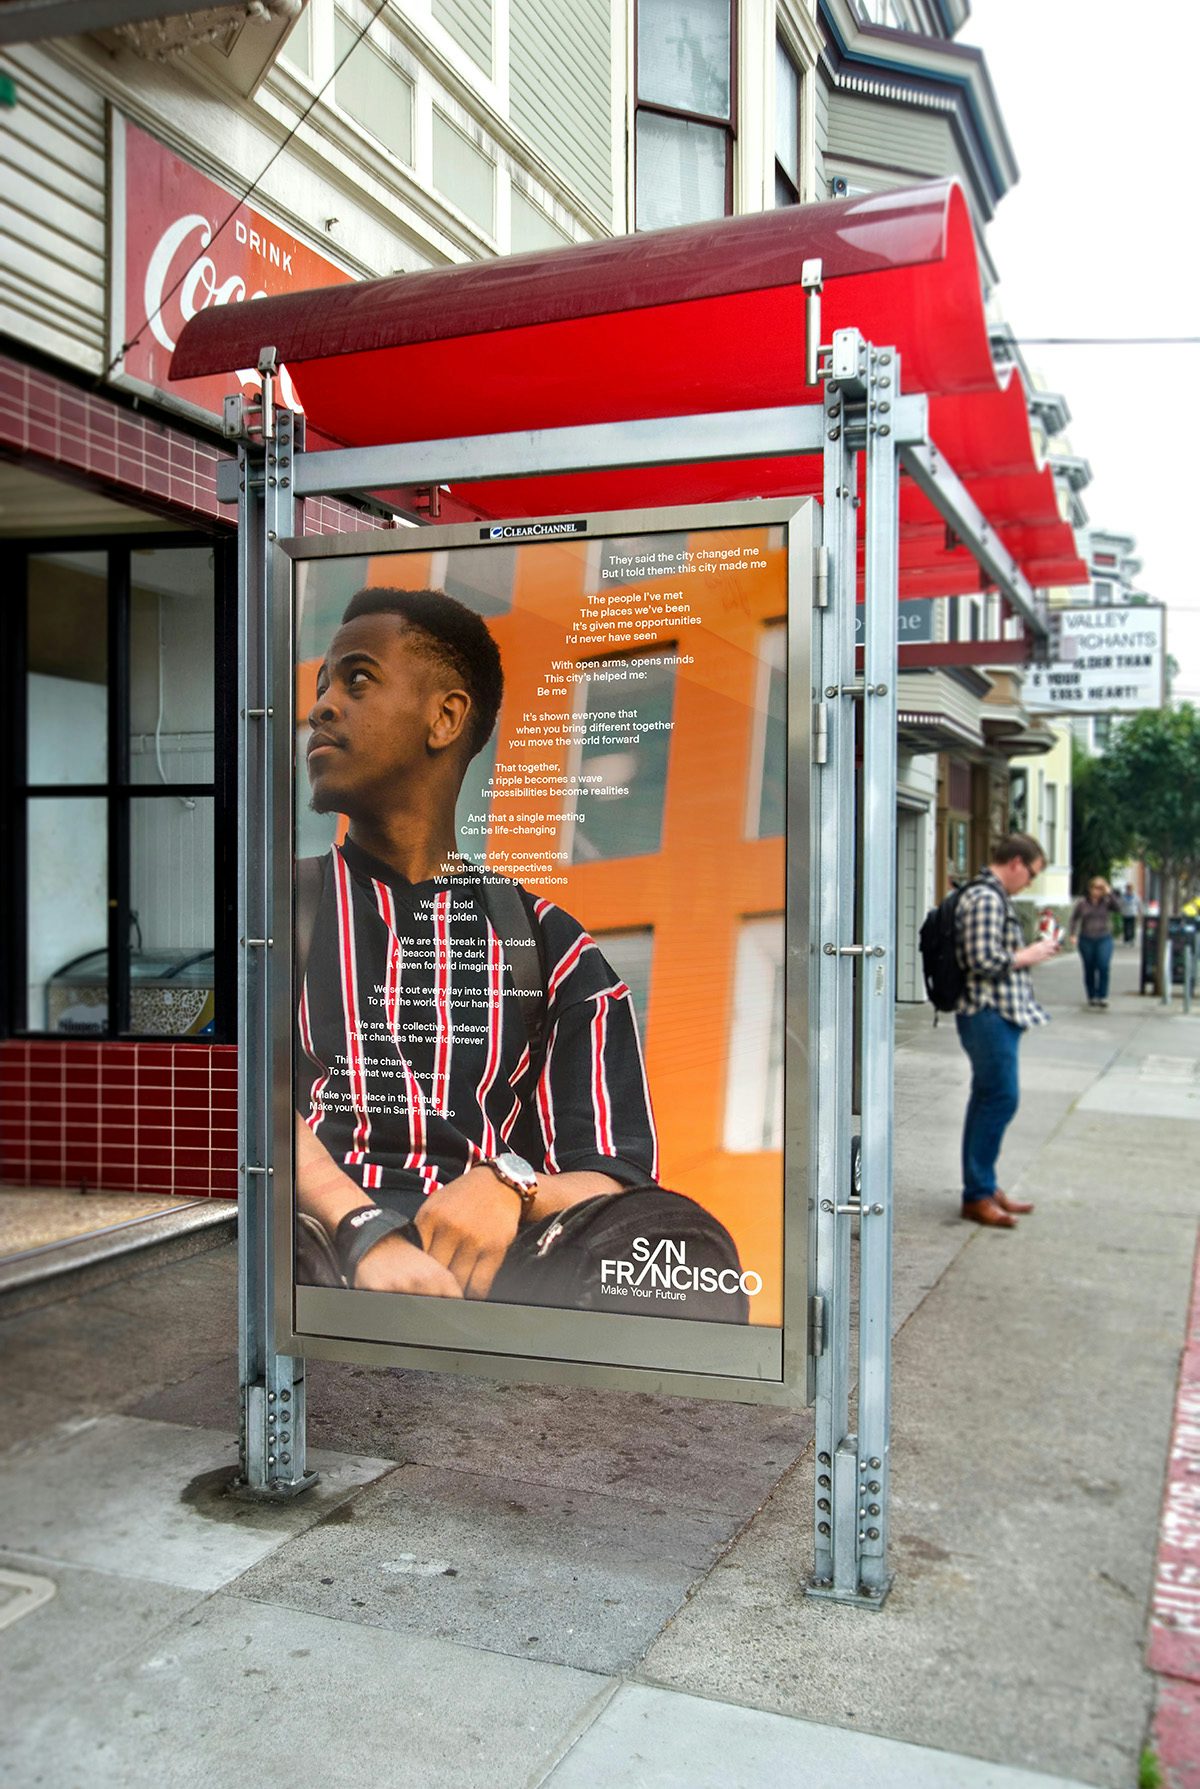 Image of an outdoor advertisement showing the San Francisco place branding